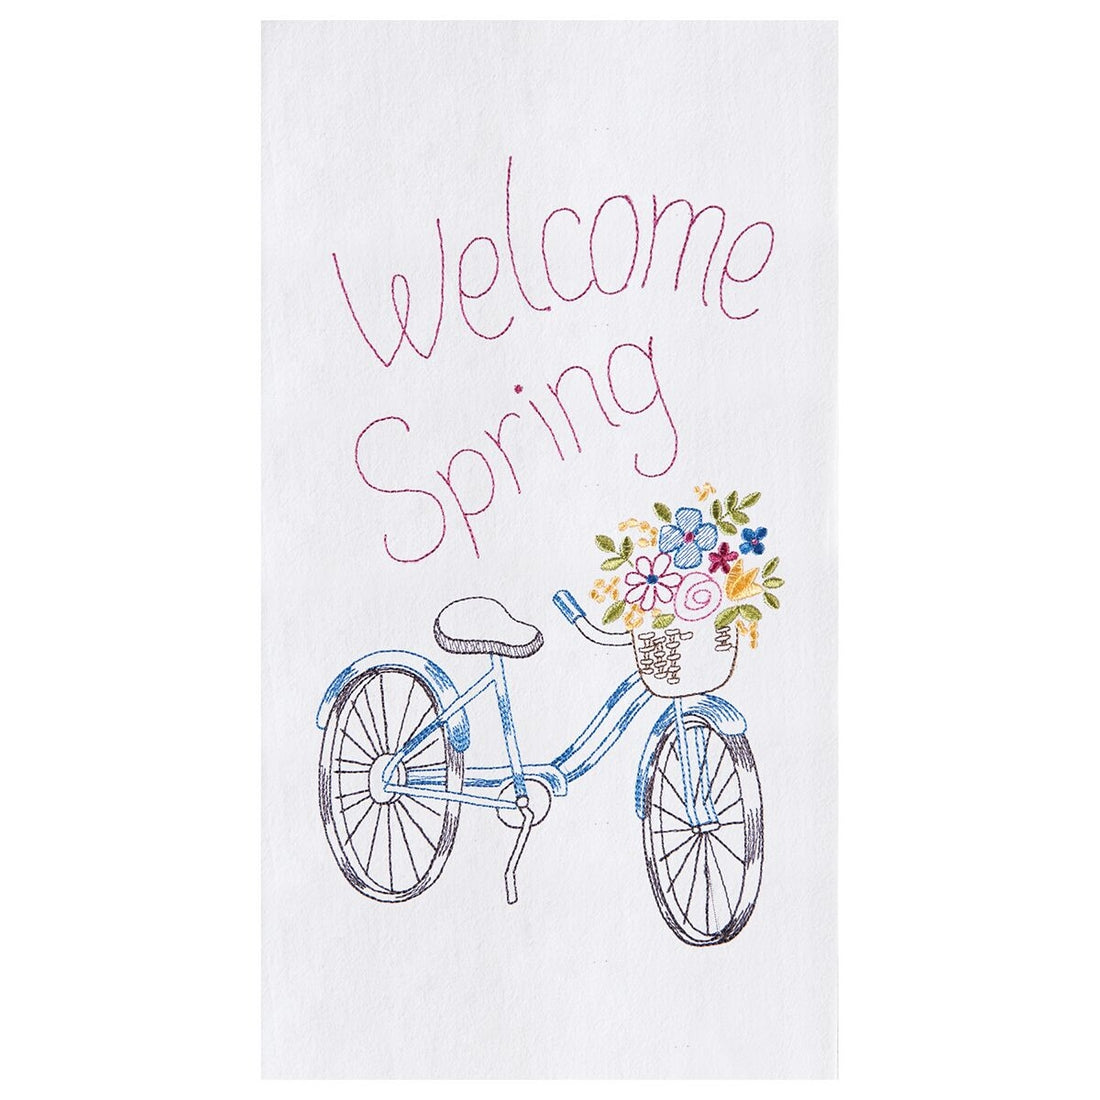 Easter decor for the home. Flour sack towel with embroidered bicycle with basket and flowers and words "Welcome Spring".